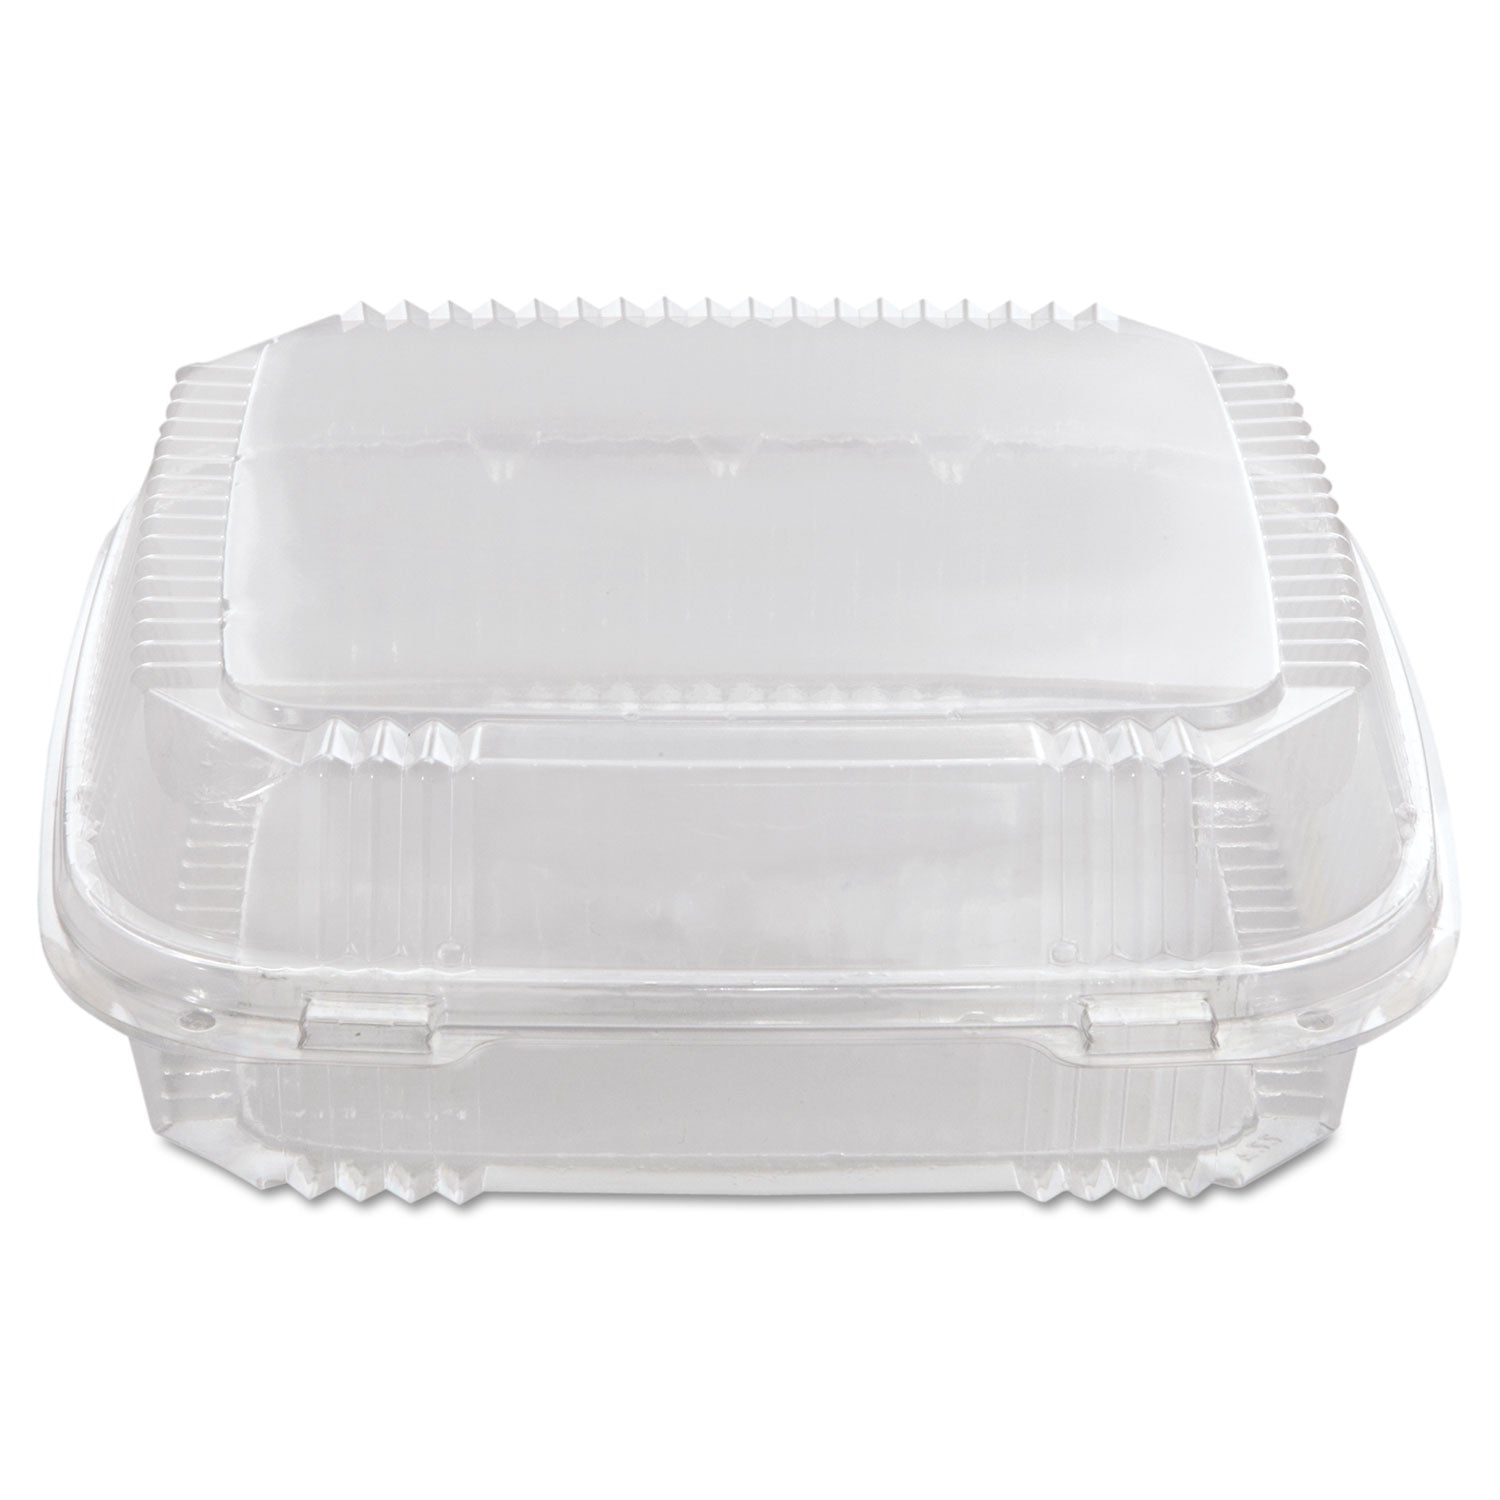 clearview-smartlock-hinged-lid-container-49-oz-82-x-834-x-291-clear-plastic-200-carton_pctyci81120 - 3